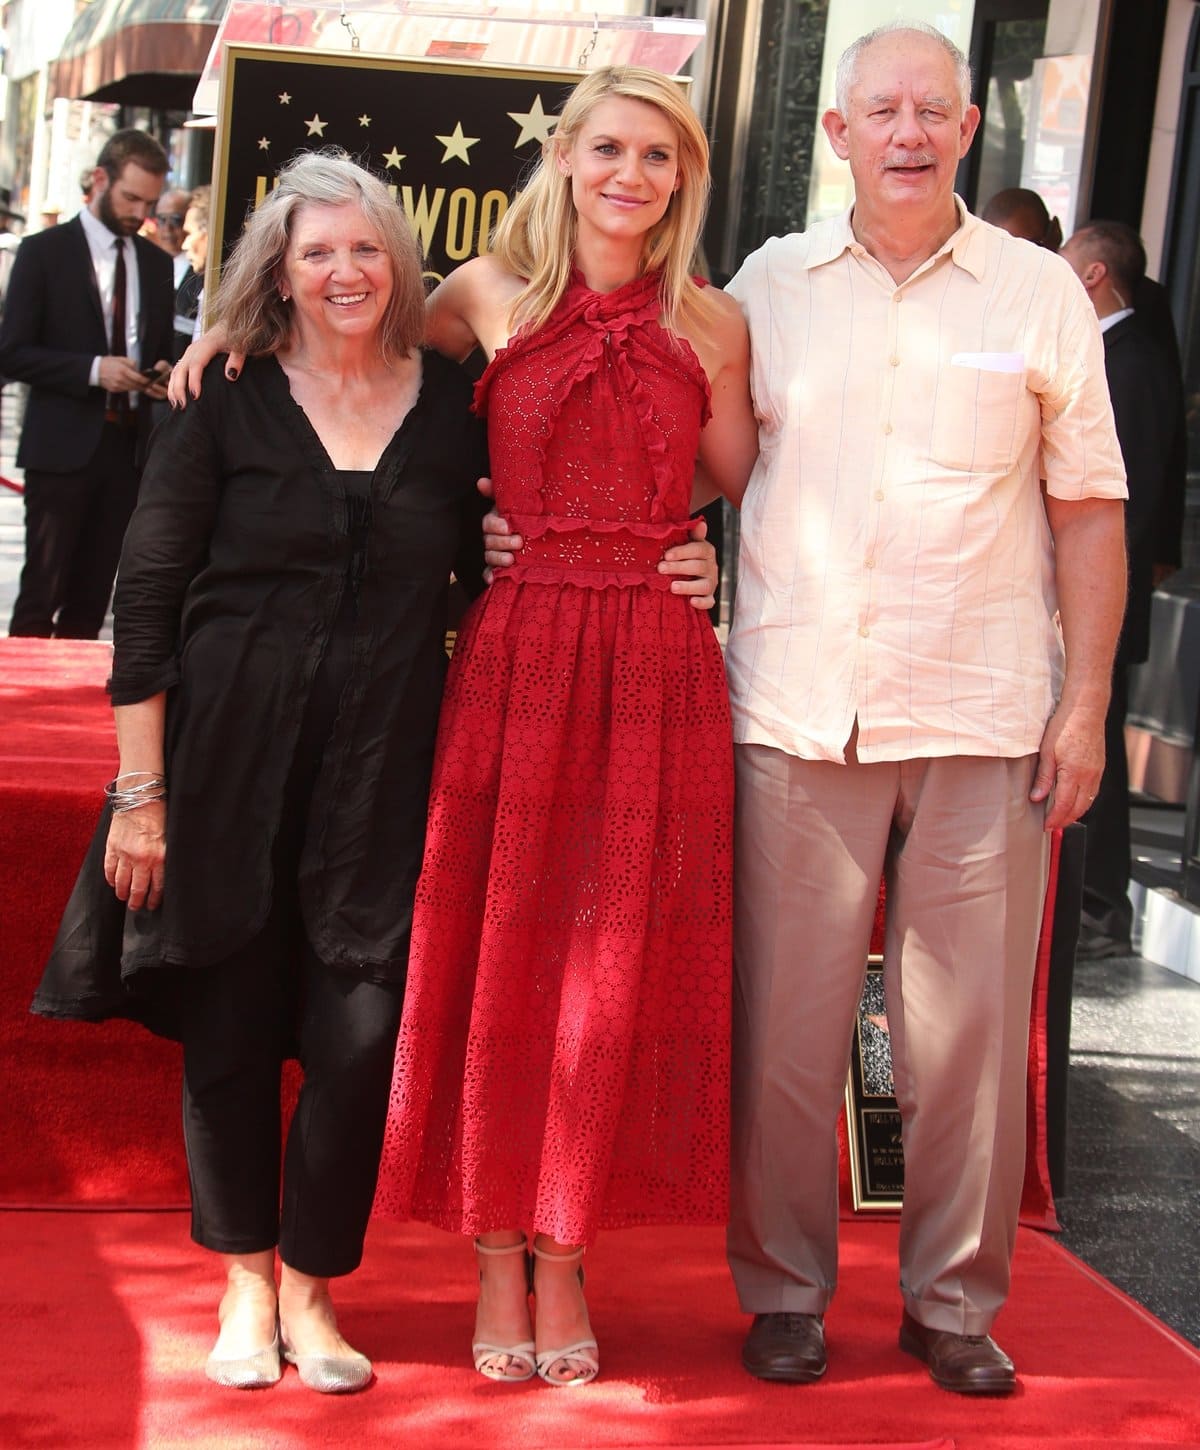 Actress Claire Danes with her mom Carla Danes (née Hall) and her dad Christopher Danes